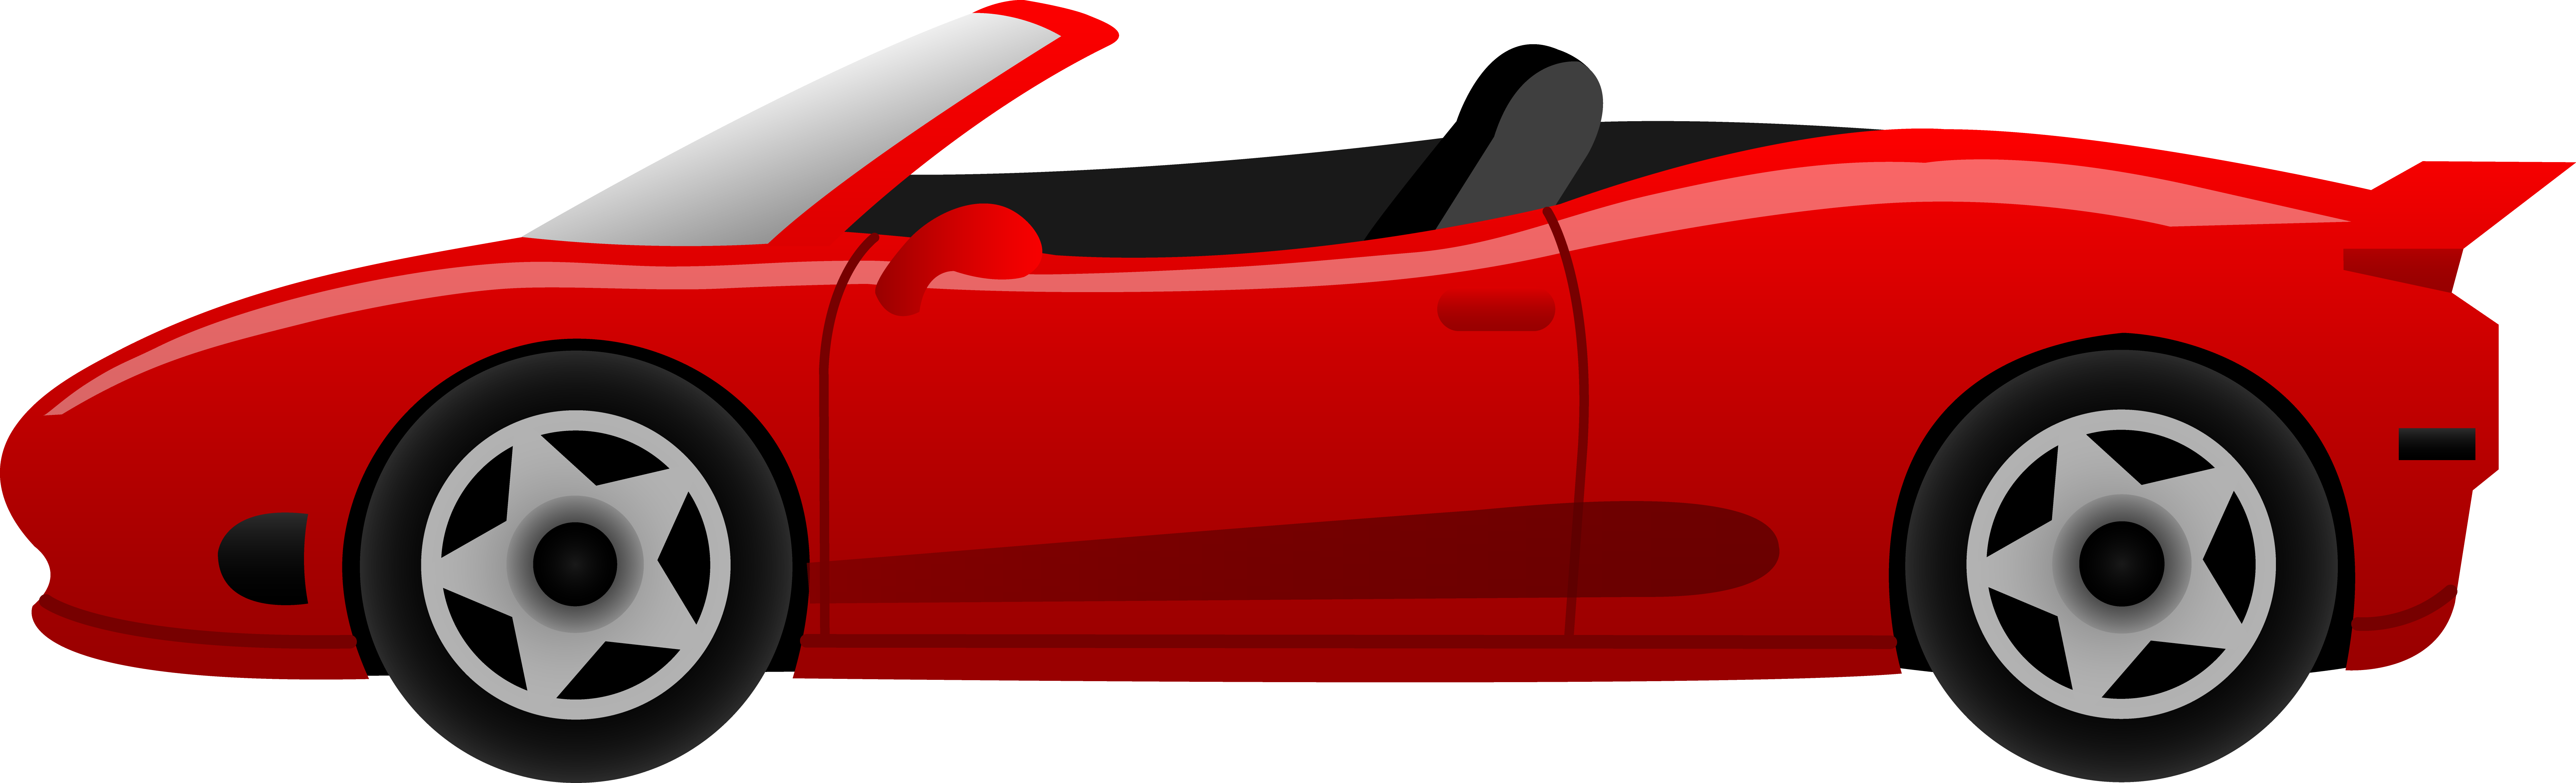 Sports car clipart side view 